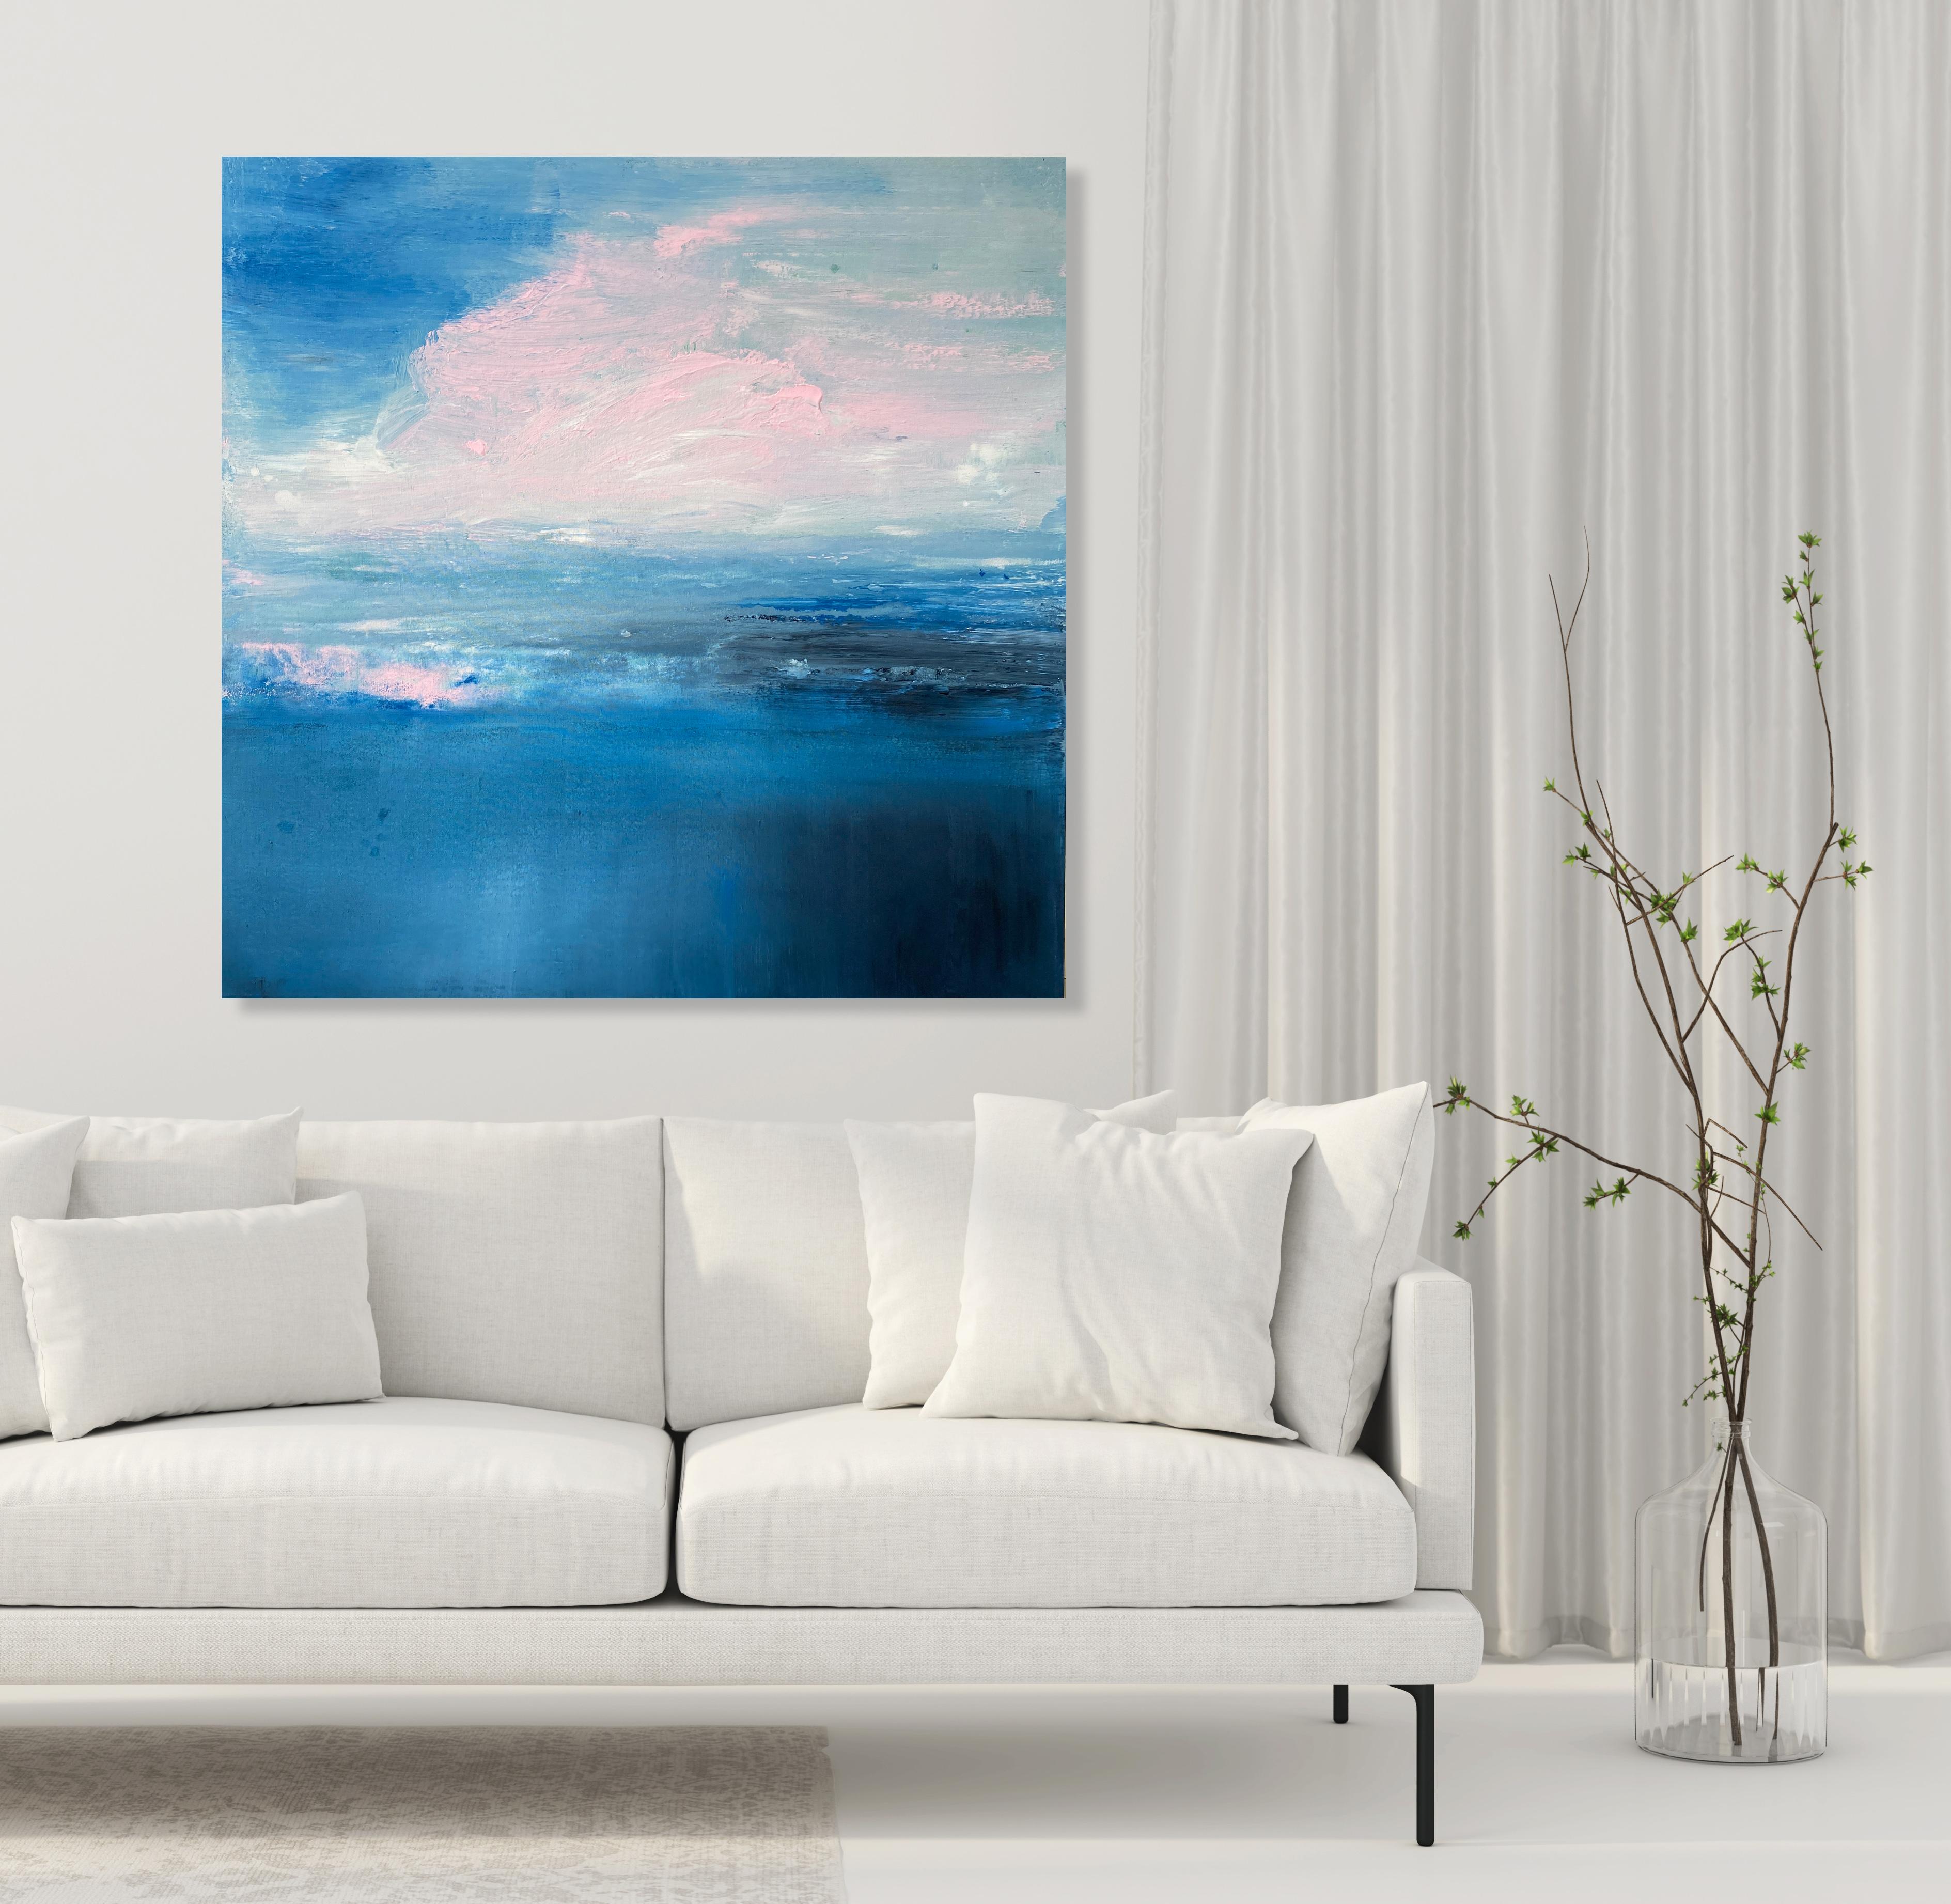 Summer Swimming blue pink ocean abstract landscape cloudy impressionism sky  - Painting by Kathleen Rhee